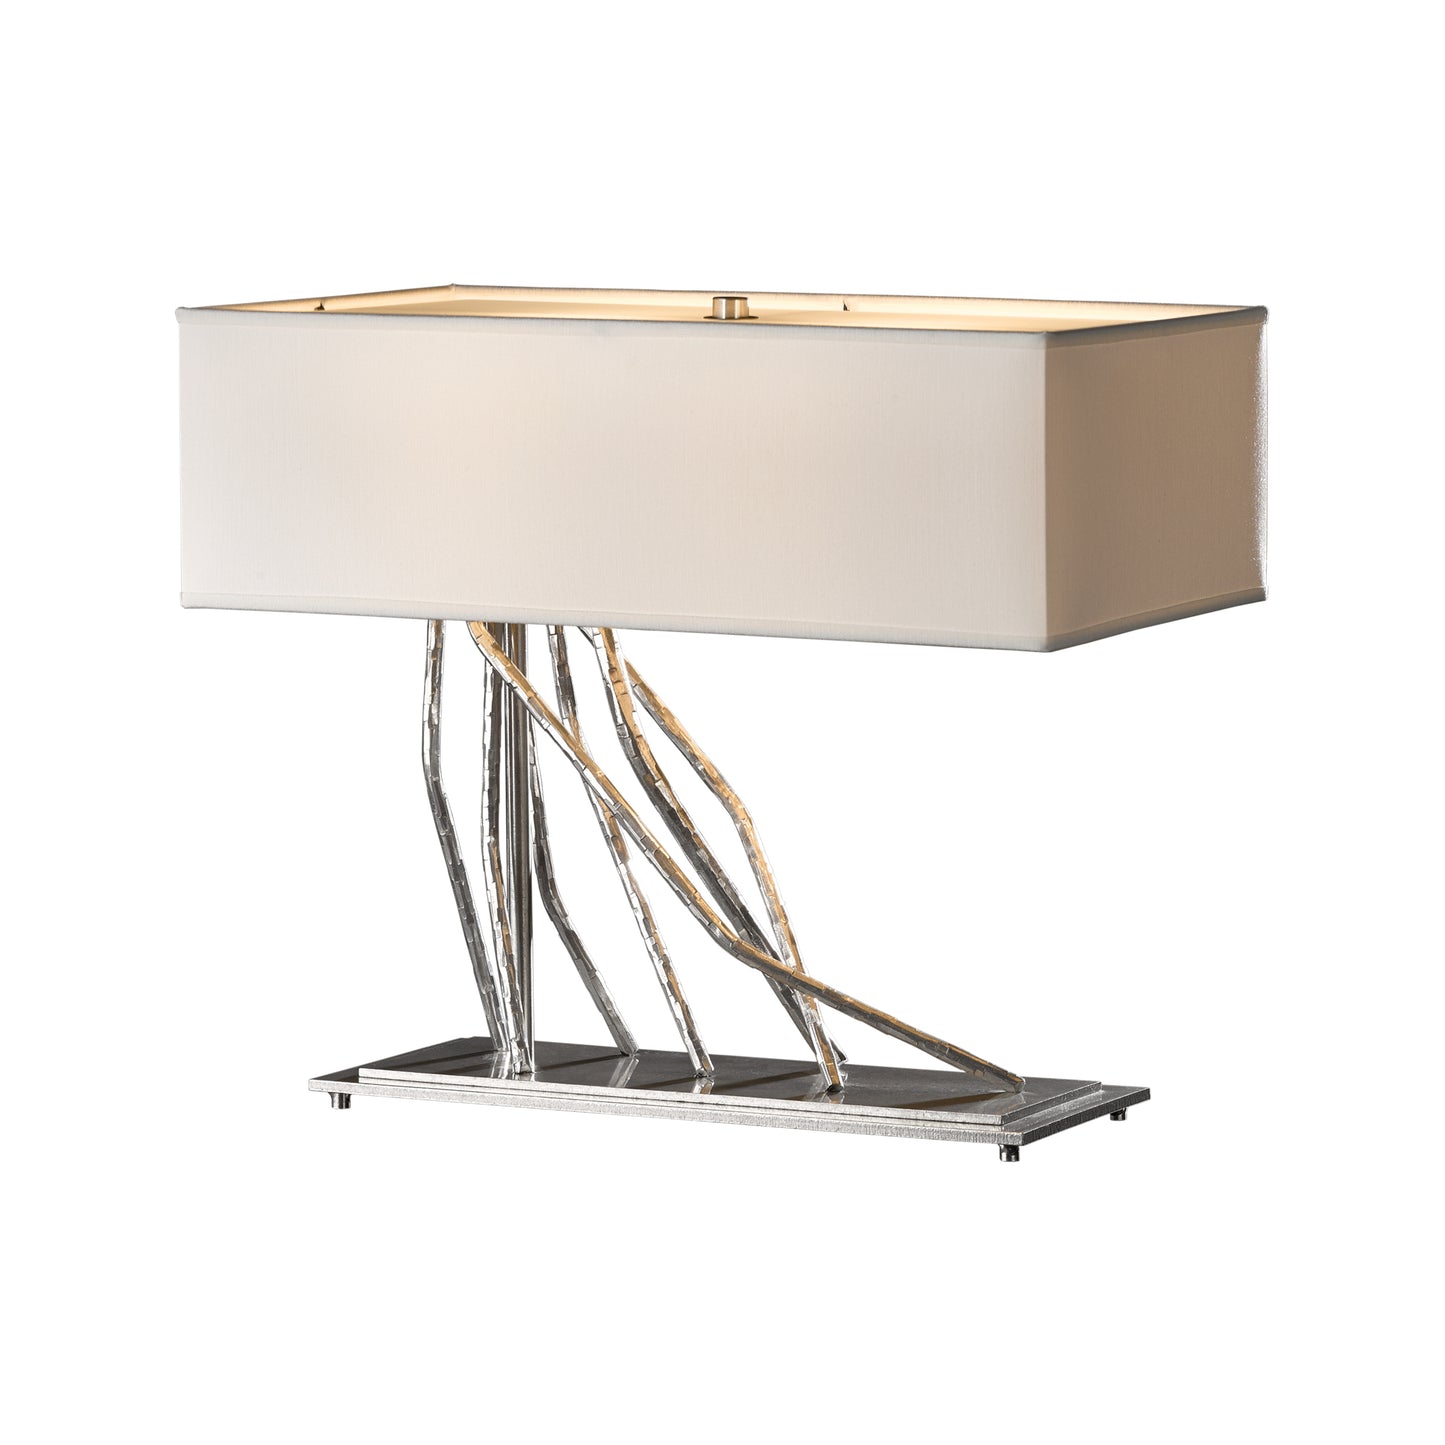 A modern hand-forged Brindille Table Lamp with a rectangular beige shade and a unique metallic base featuring intertwined iron rods on a reflective platform by Hubbardton Forge.